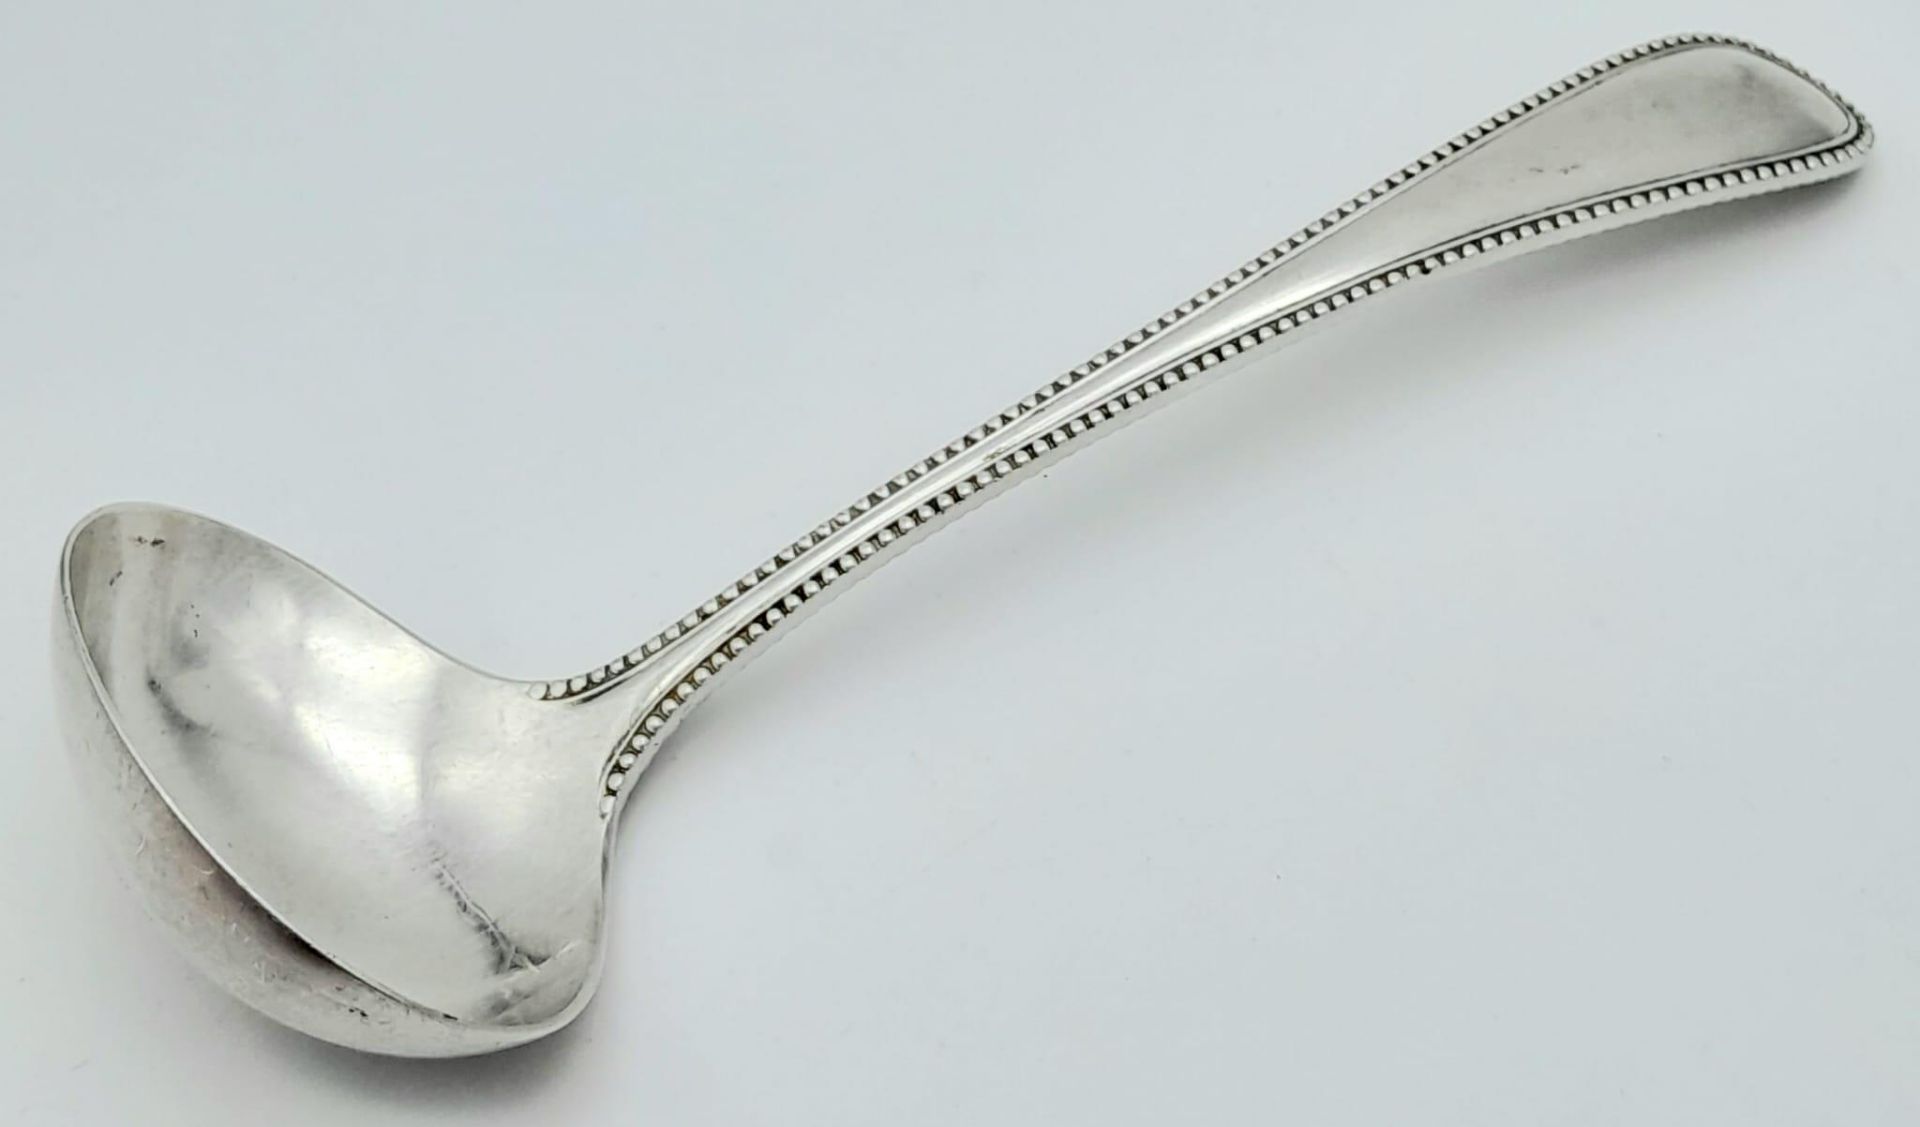 An antique Silver Ladle. Fully hallmarked and measures 19.5cm in length. Weight: 91.36g - Image 2 of 5